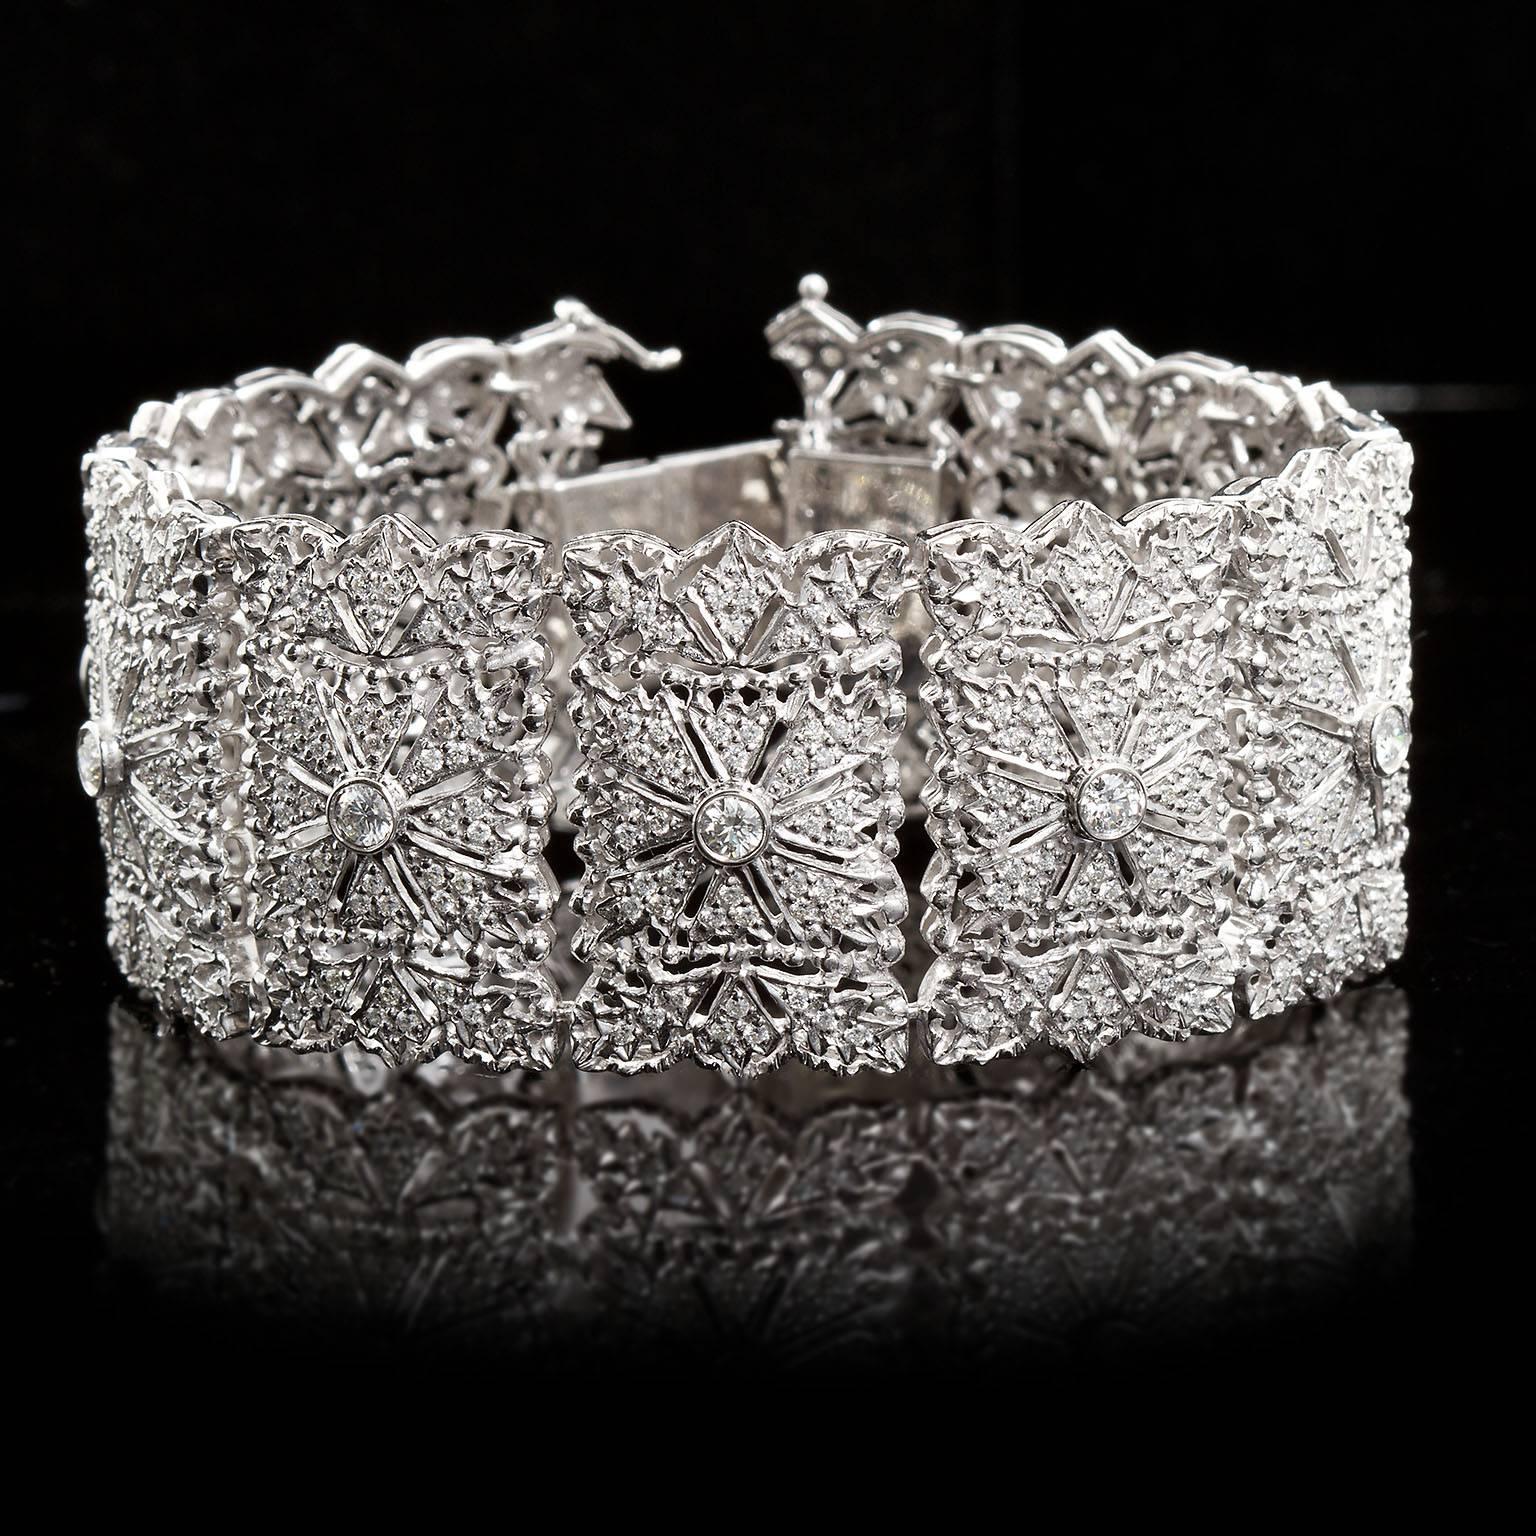 A fine diamond in white gold bracelet. Inspired by the legendary Italian metalworker Buccellati, this wide bracelet has the open lattice and delicate metalwork in ten sections delicately micro set with approx. 7.80 carats of diamond pavé. Another